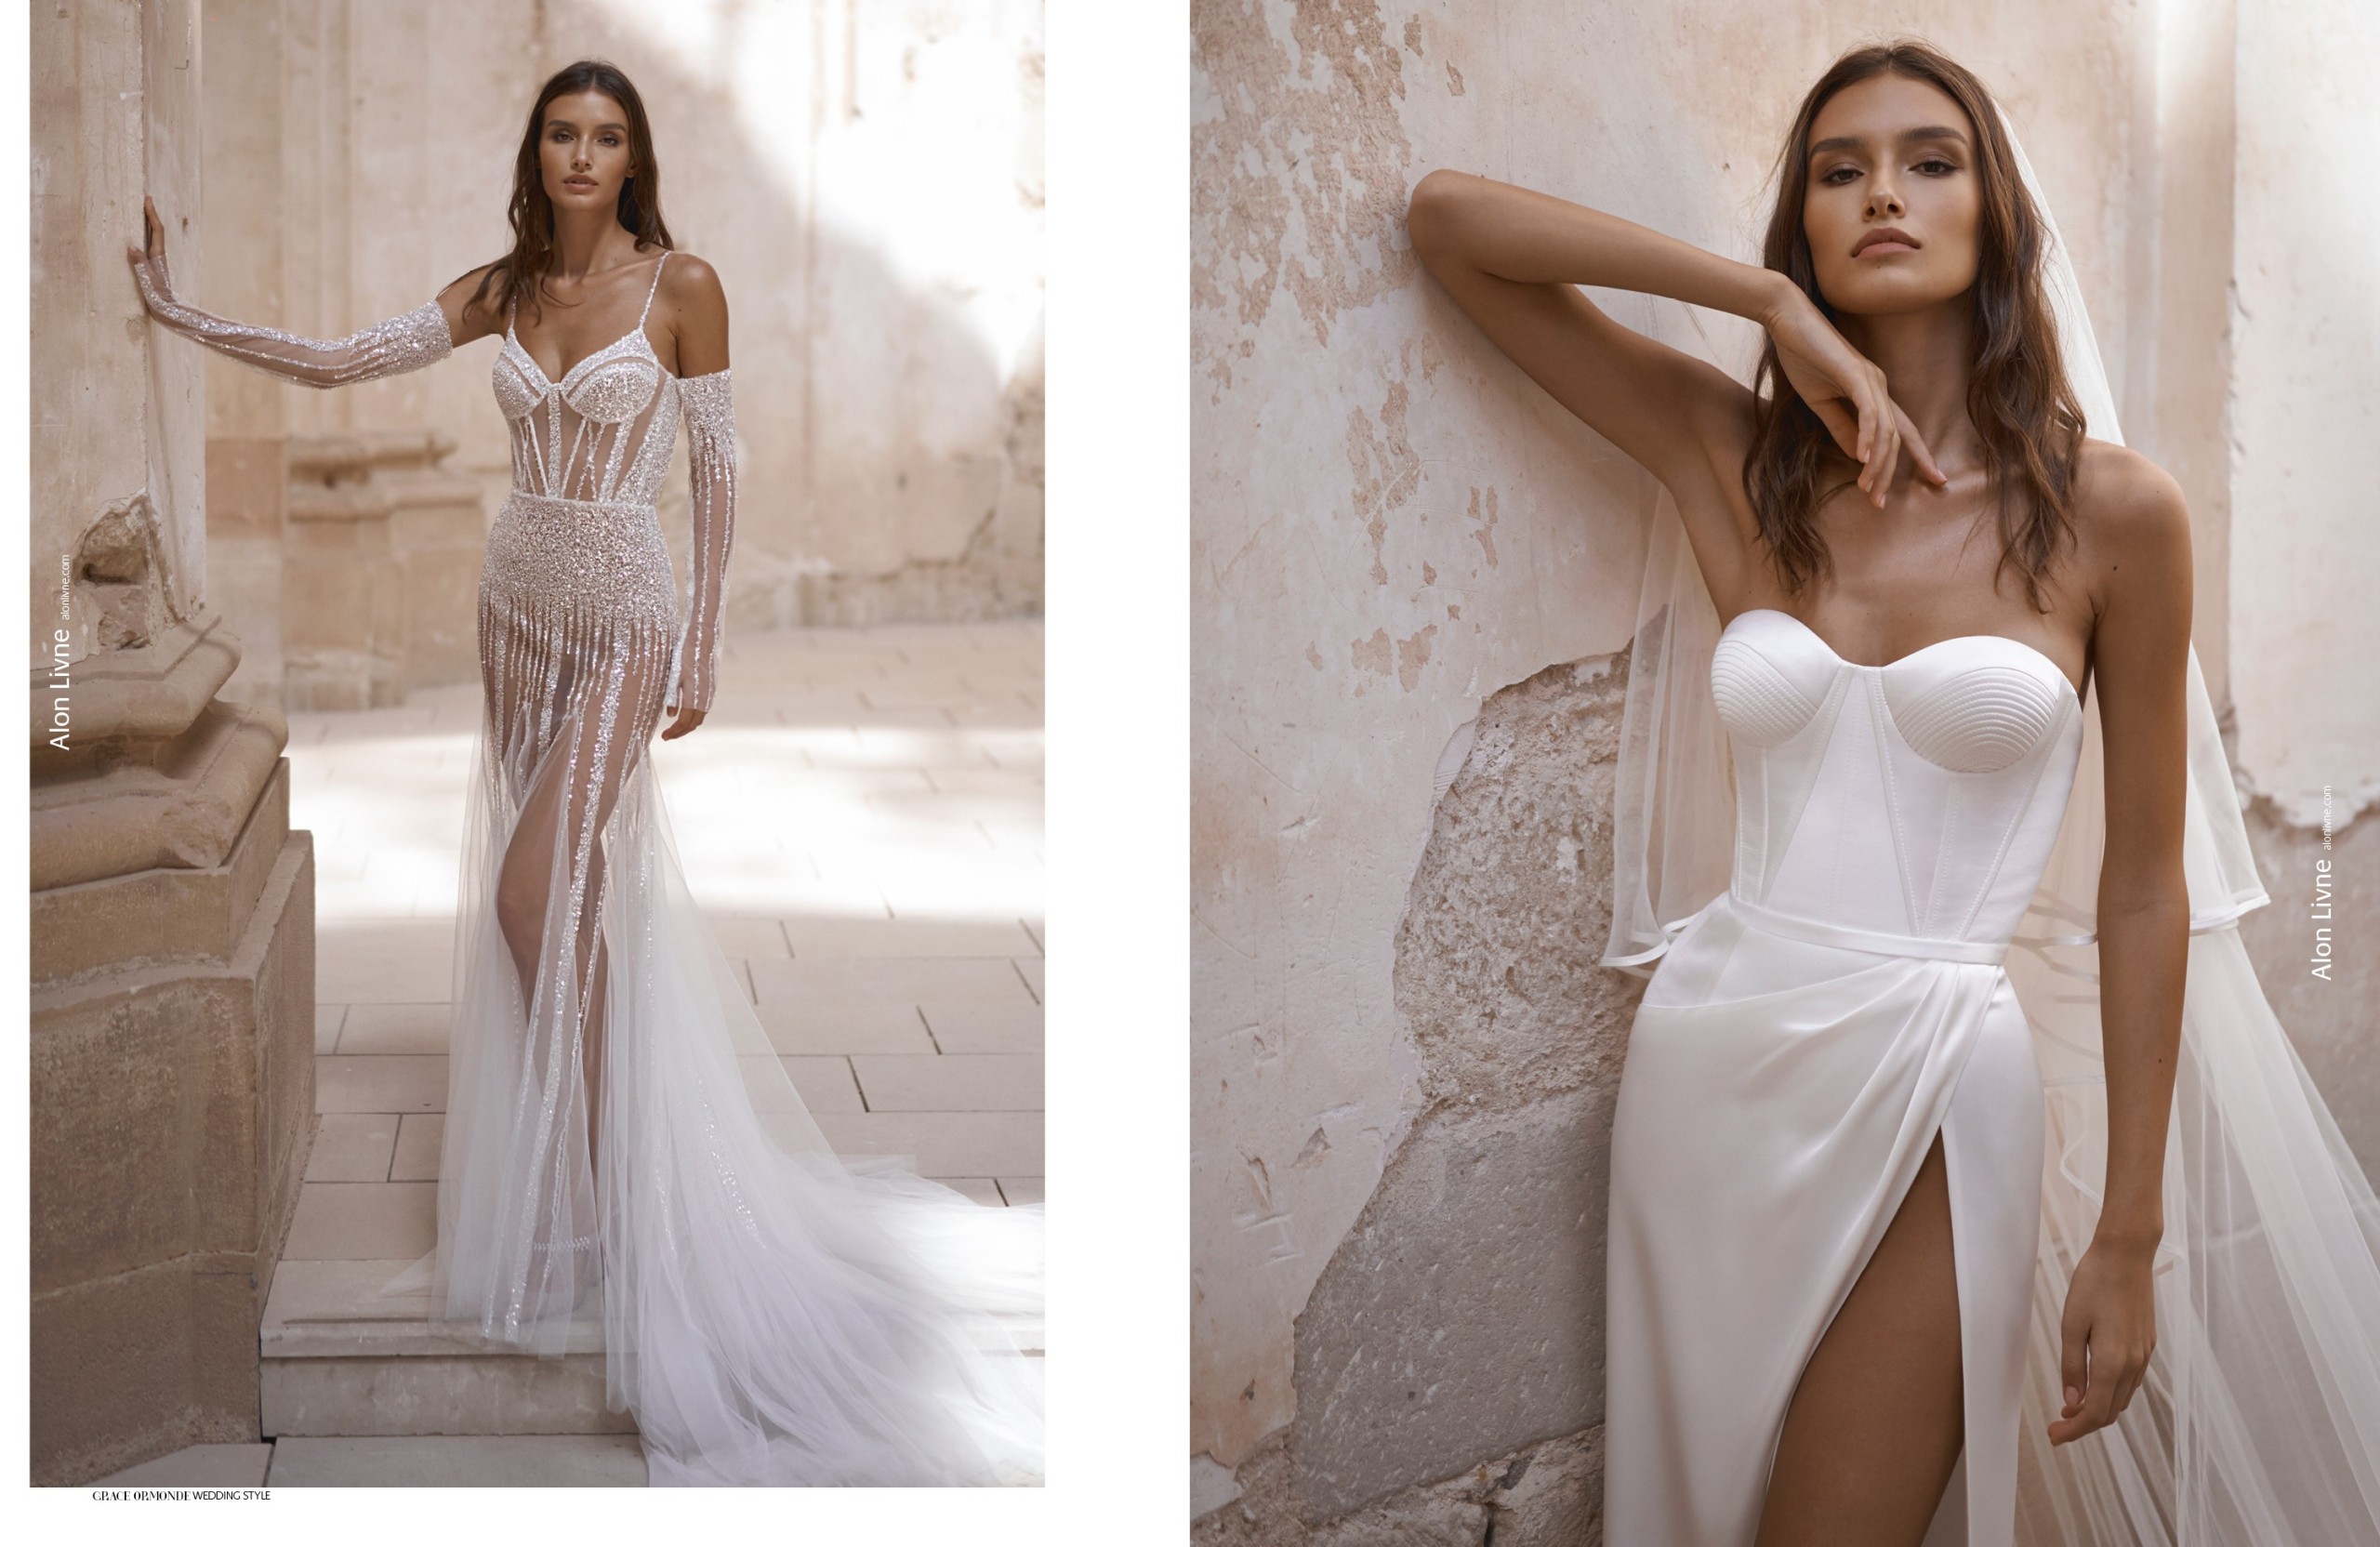 Bridal Trends 2022 - 2023 | Future and current wedding dress trends 2022  Real brides in wedding dresses of different styles by Eva Landel design